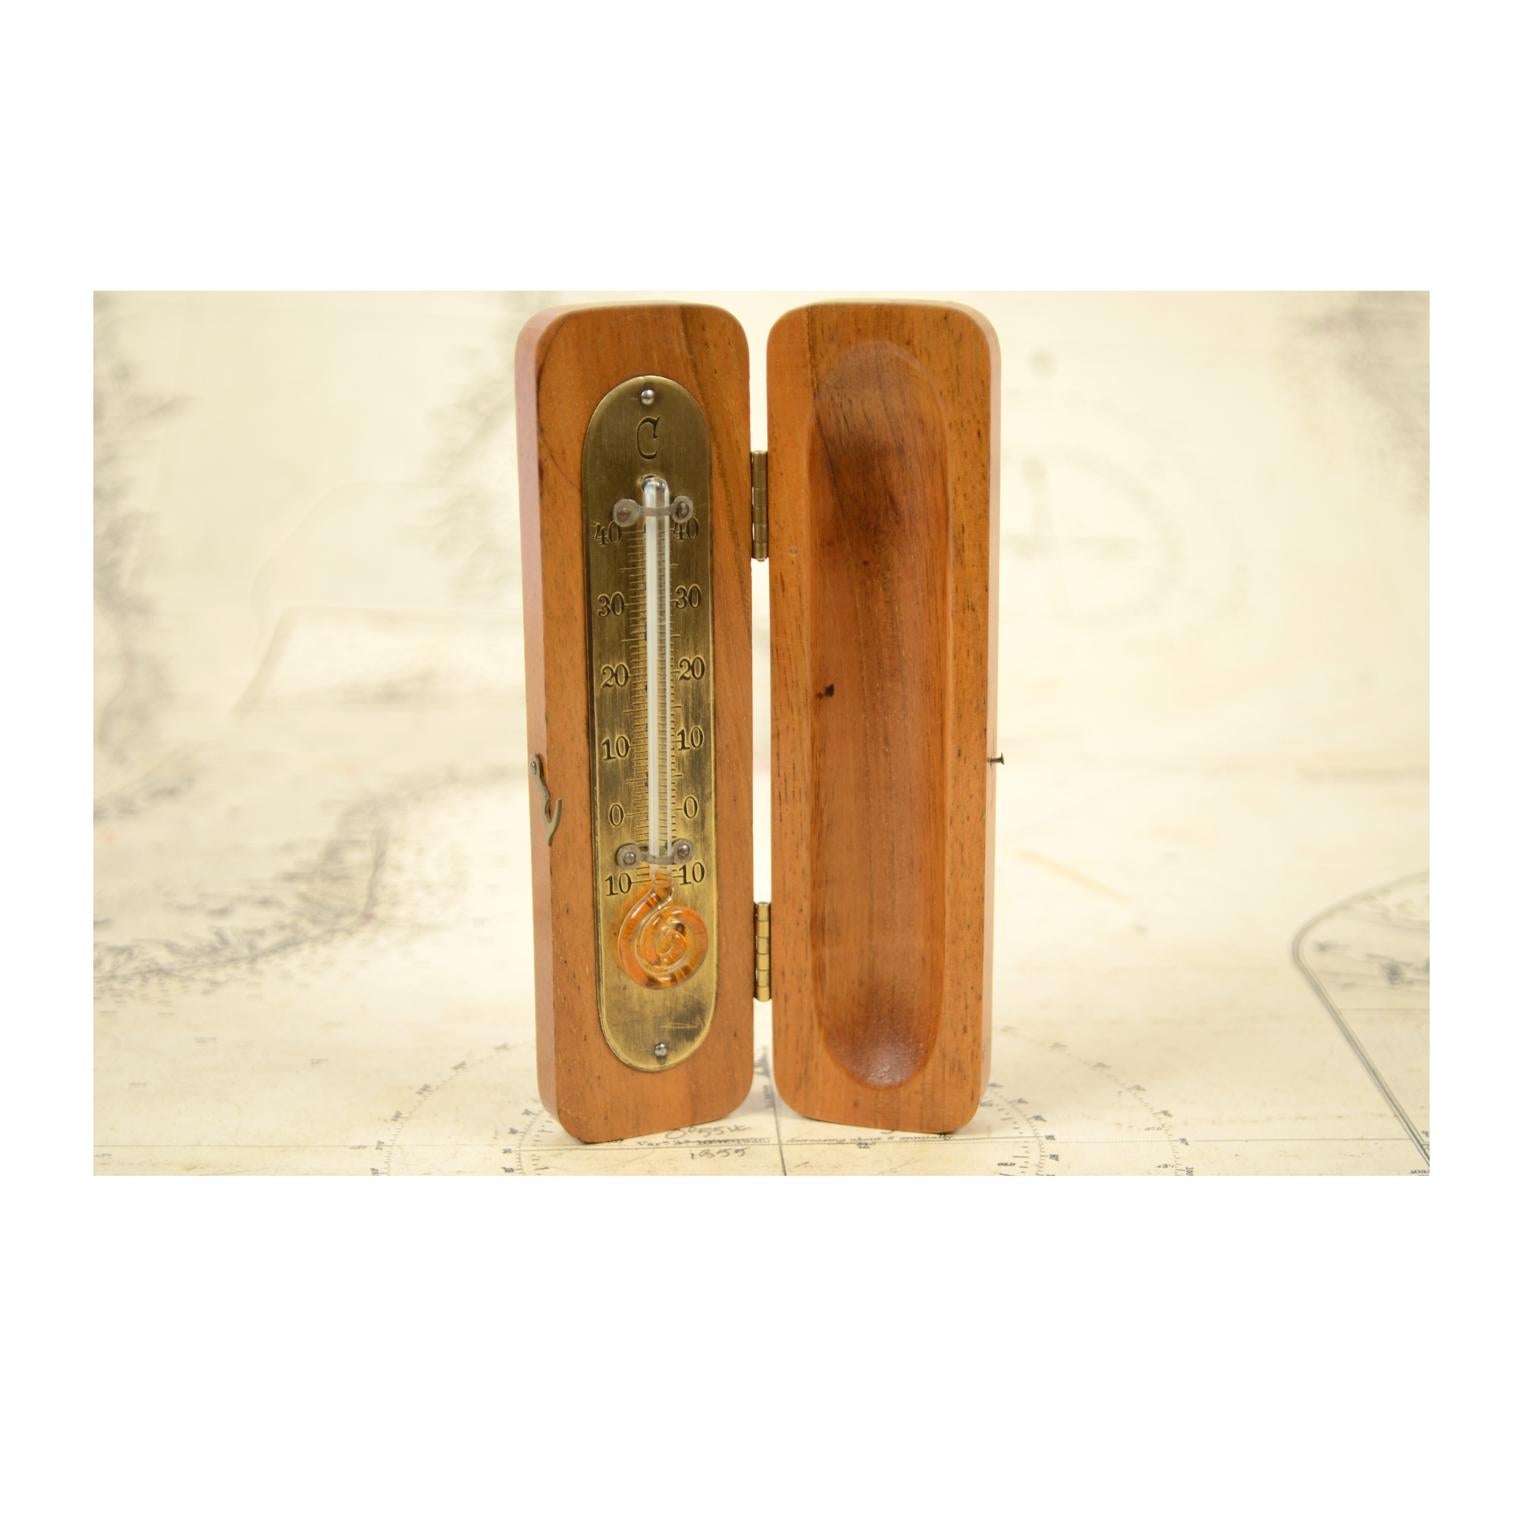 Alcohol and spiral travel thermometer made in the 1920s with a centigrade scale mounted on a brass plate and placed in a wooden case with a hinge closure. Very good condition. Measures: 13 x 2 x 3.5 cm. Shipping insured by Lloyd's London; it is